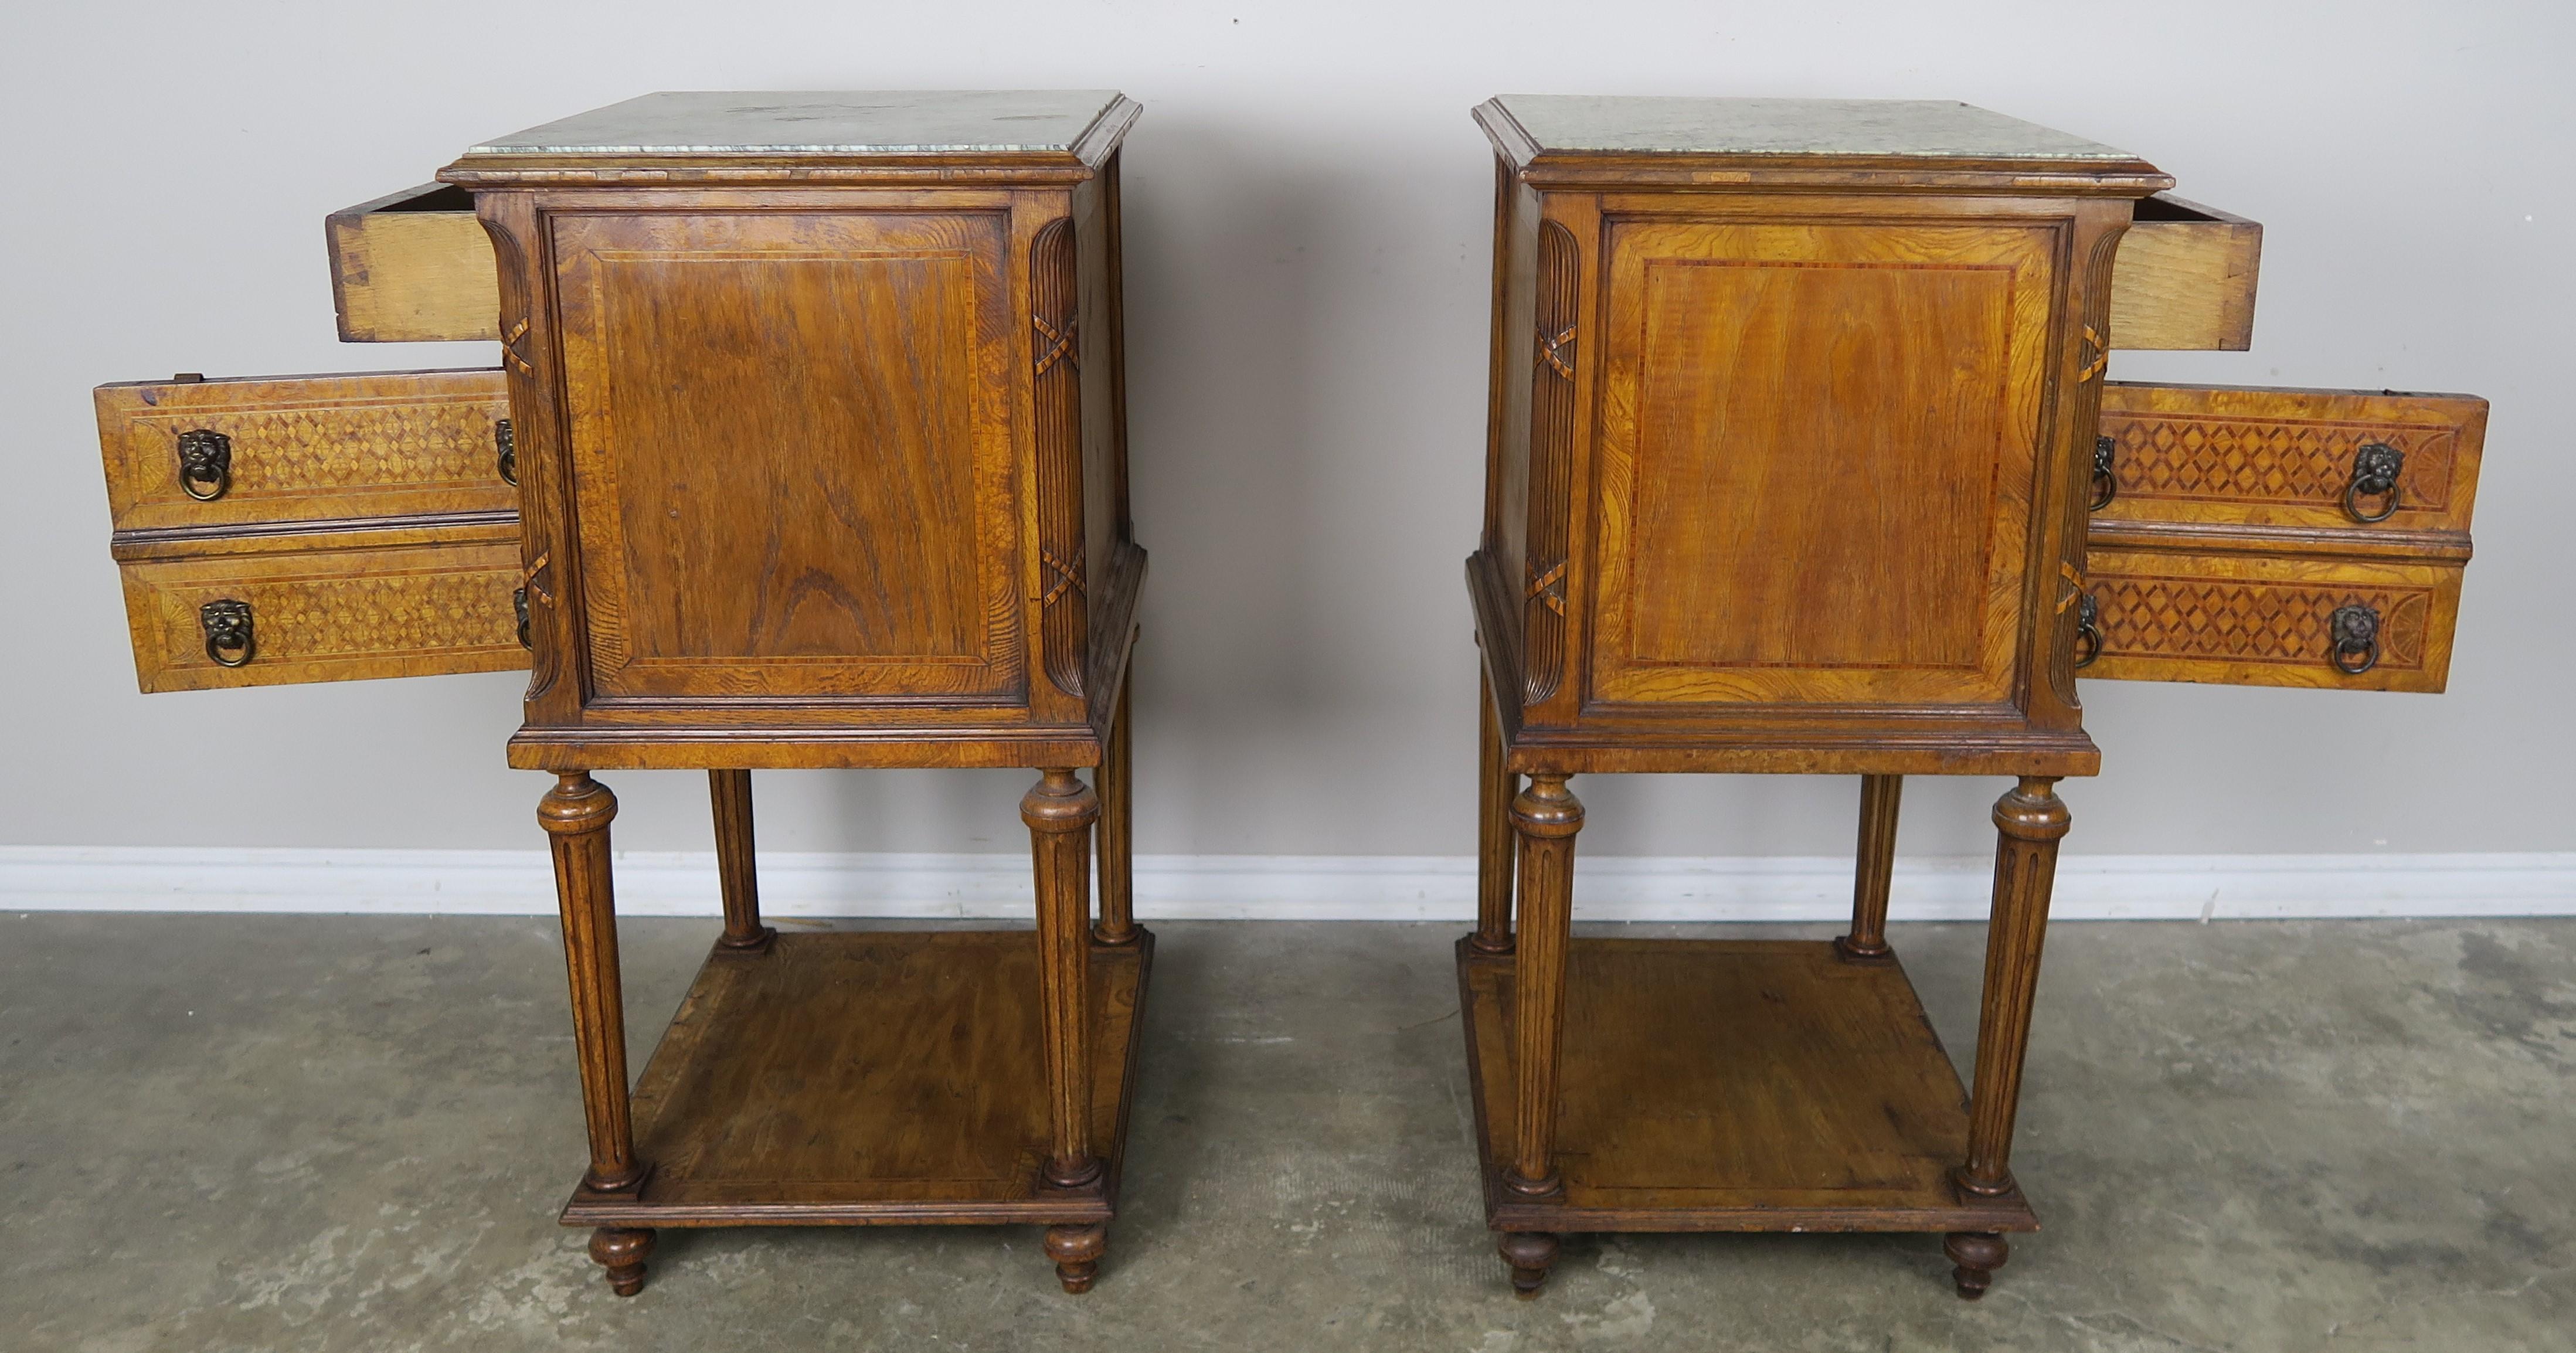 Neoclassical Pair of 19th Century Louis XVI Style Nightstands with Marble Tops